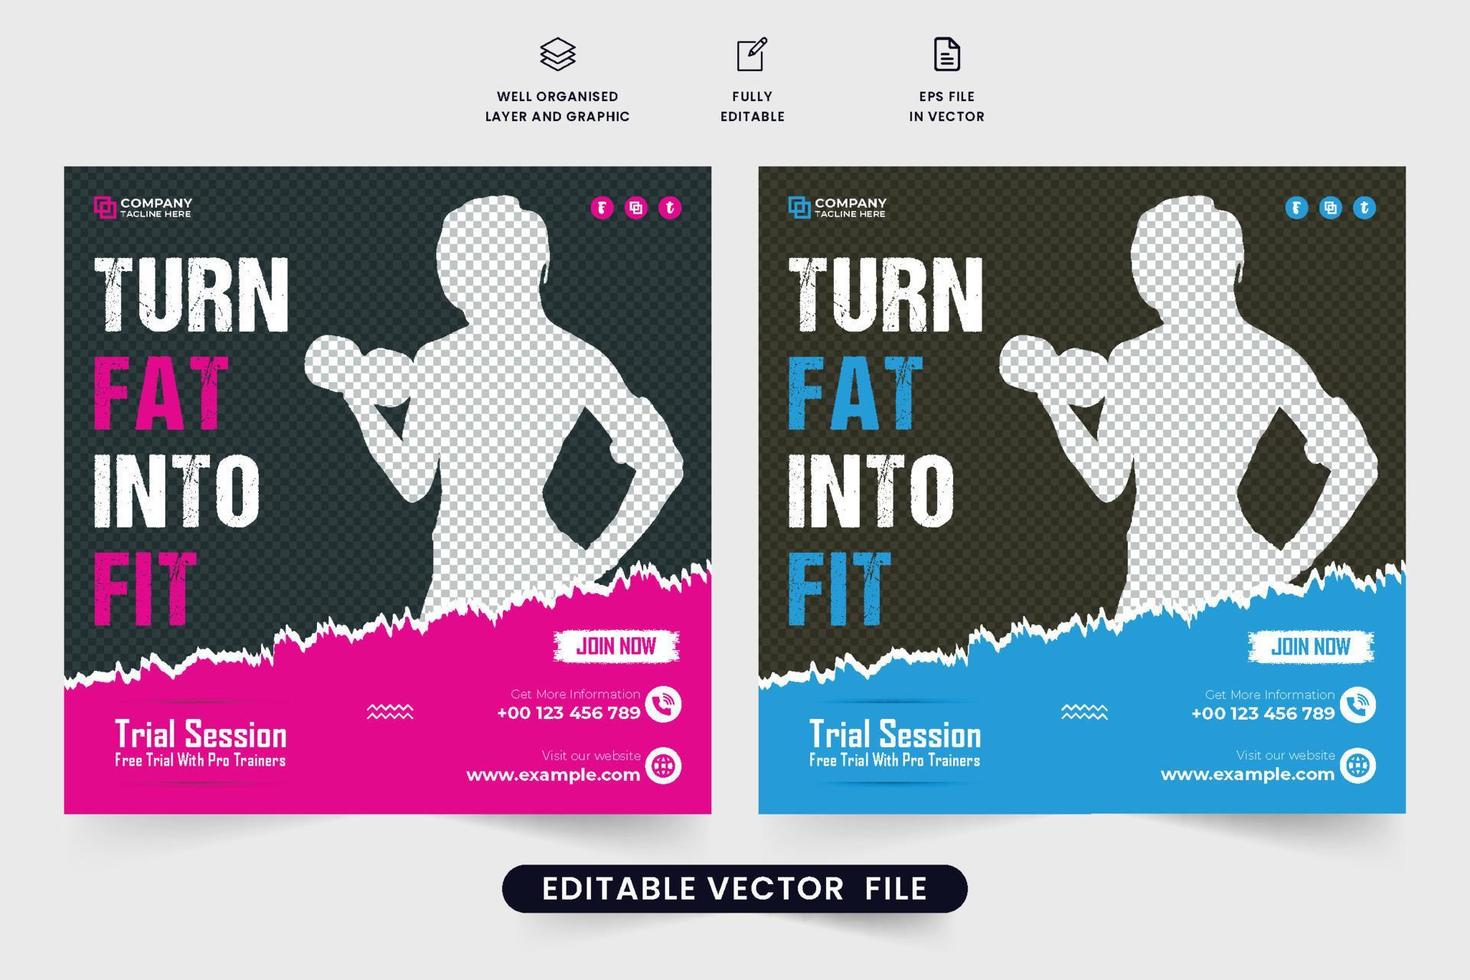 Fitness gym advertisement template for digital marketing. Gym business social media post vector with pink and blue colors. Gym workout session promotional web banner design with abstract shapes.